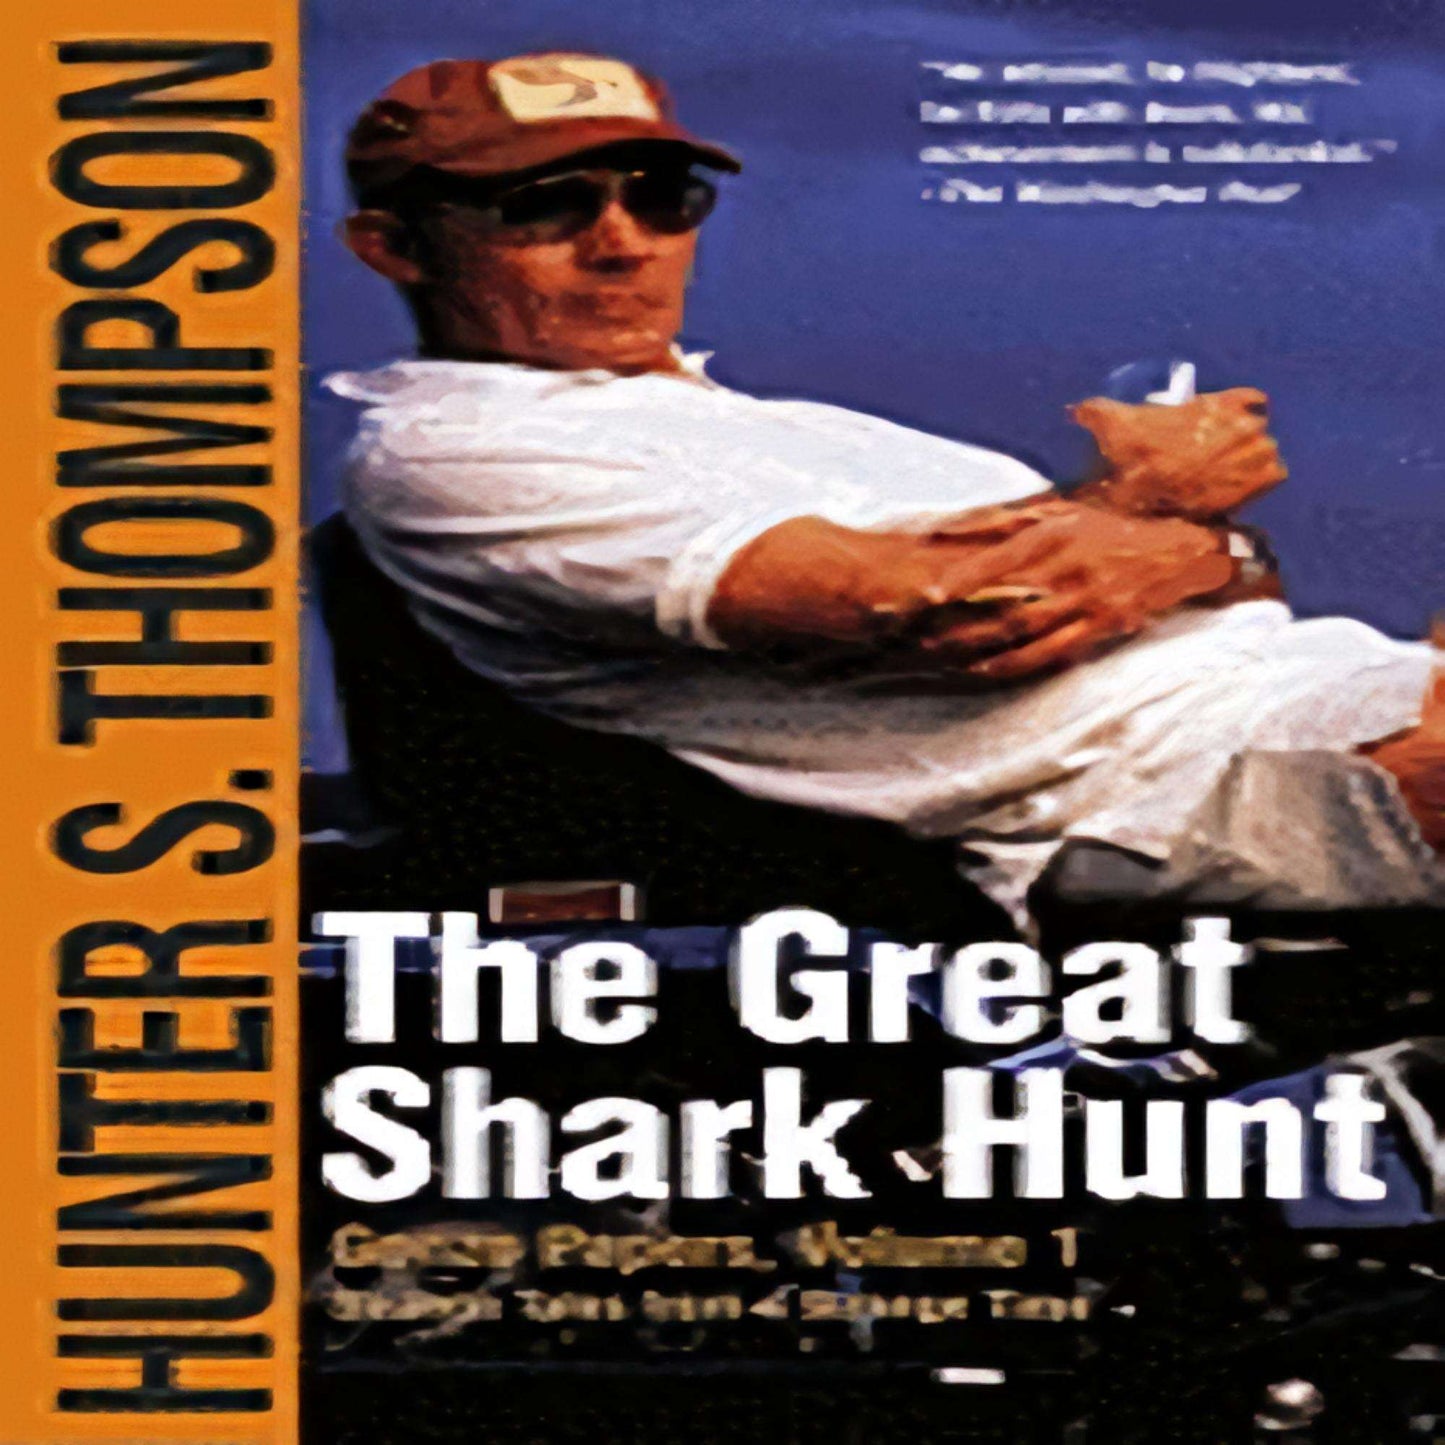 The Great Shark Hunt: Strange Tales from a Strange Time48-012123-0743250451DPGBOOKSTORE.COM. Today's Bestsellers.